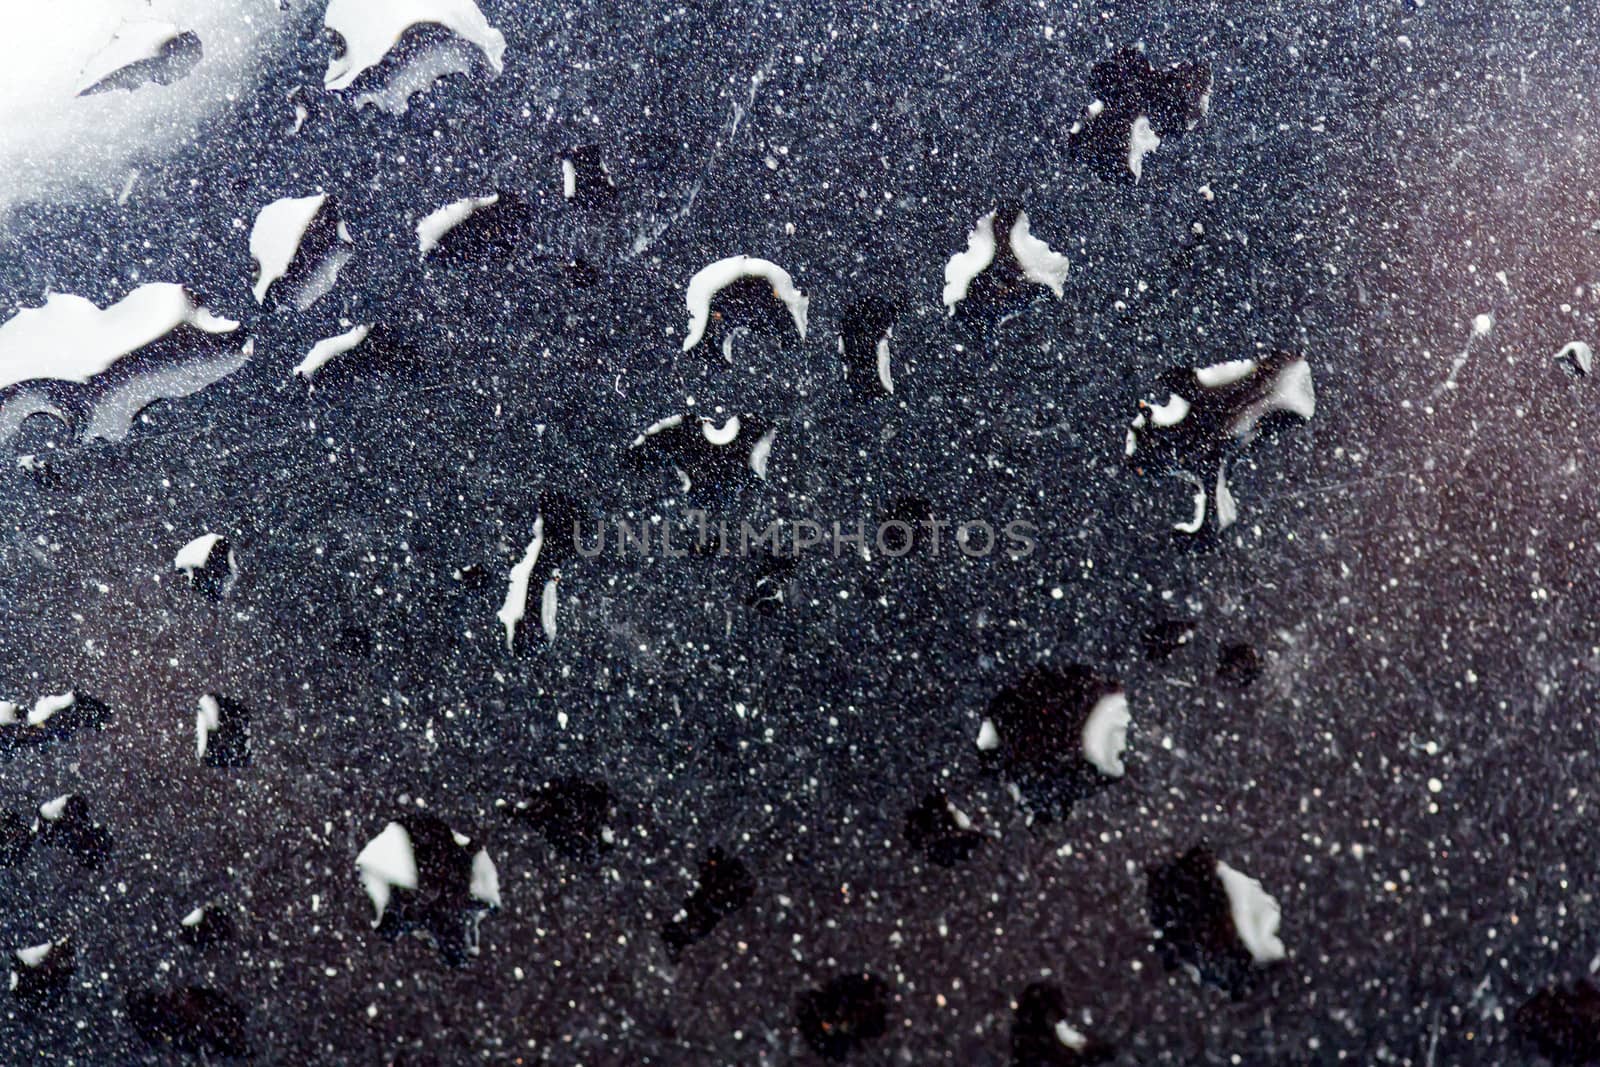 Water drops on dusty glass surface. Textured image